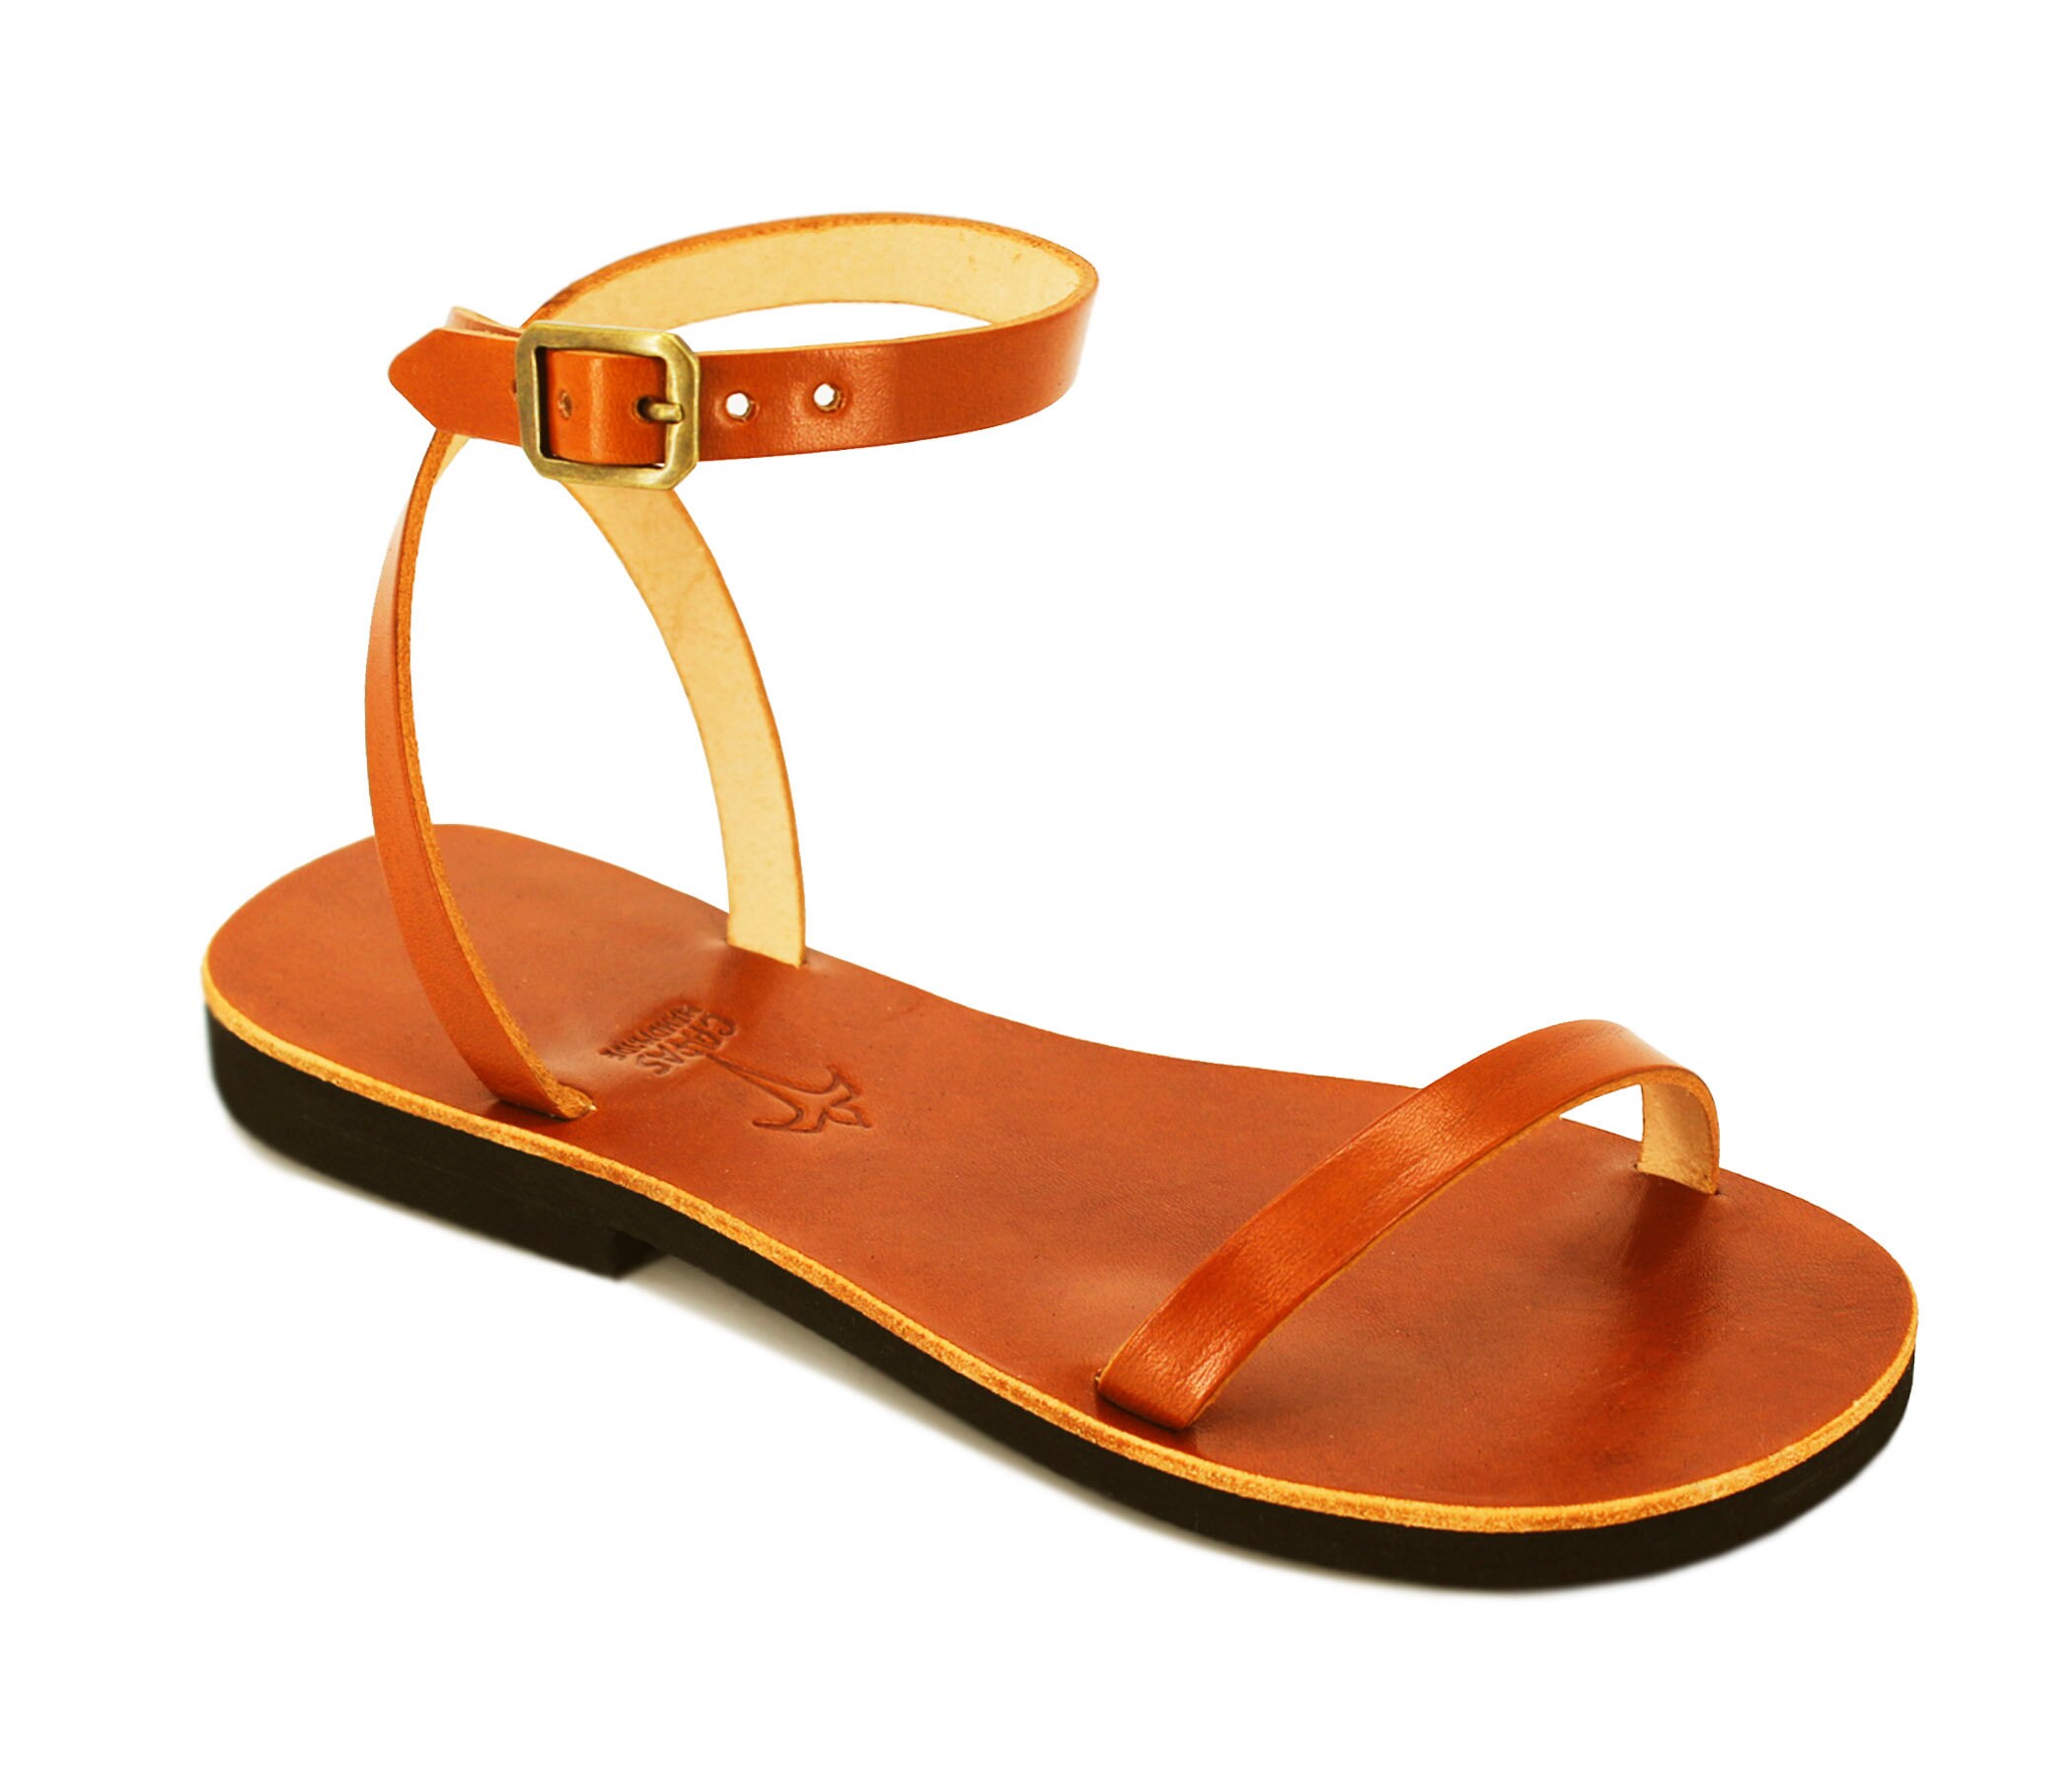 LIBERTY leather sandals women/ strappy sandals/ flat leather